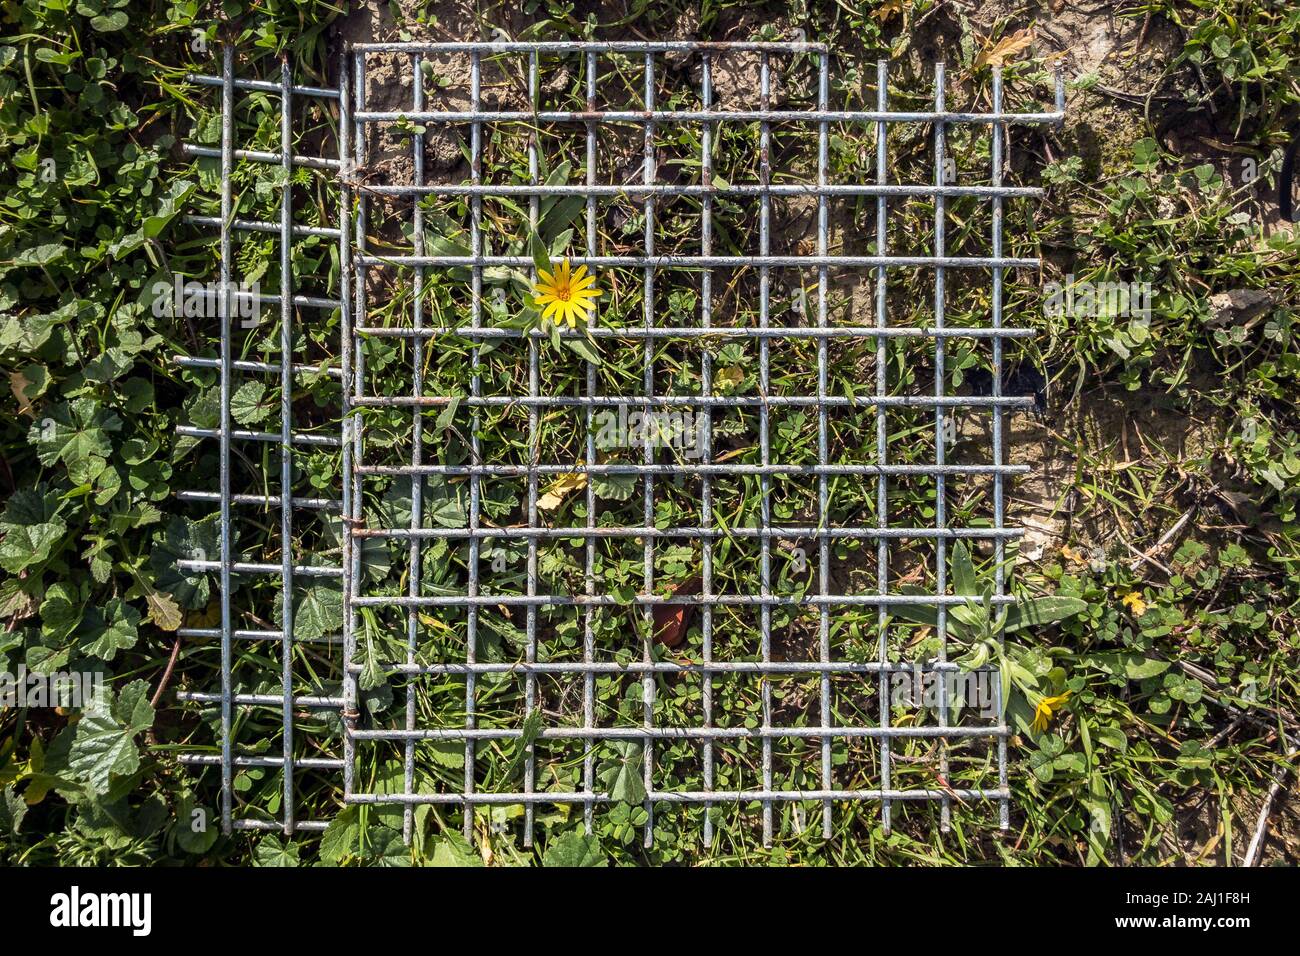 Flower coming out of a metallic net that crushes the area but the flower survives, Life makes its way. Stock Photo